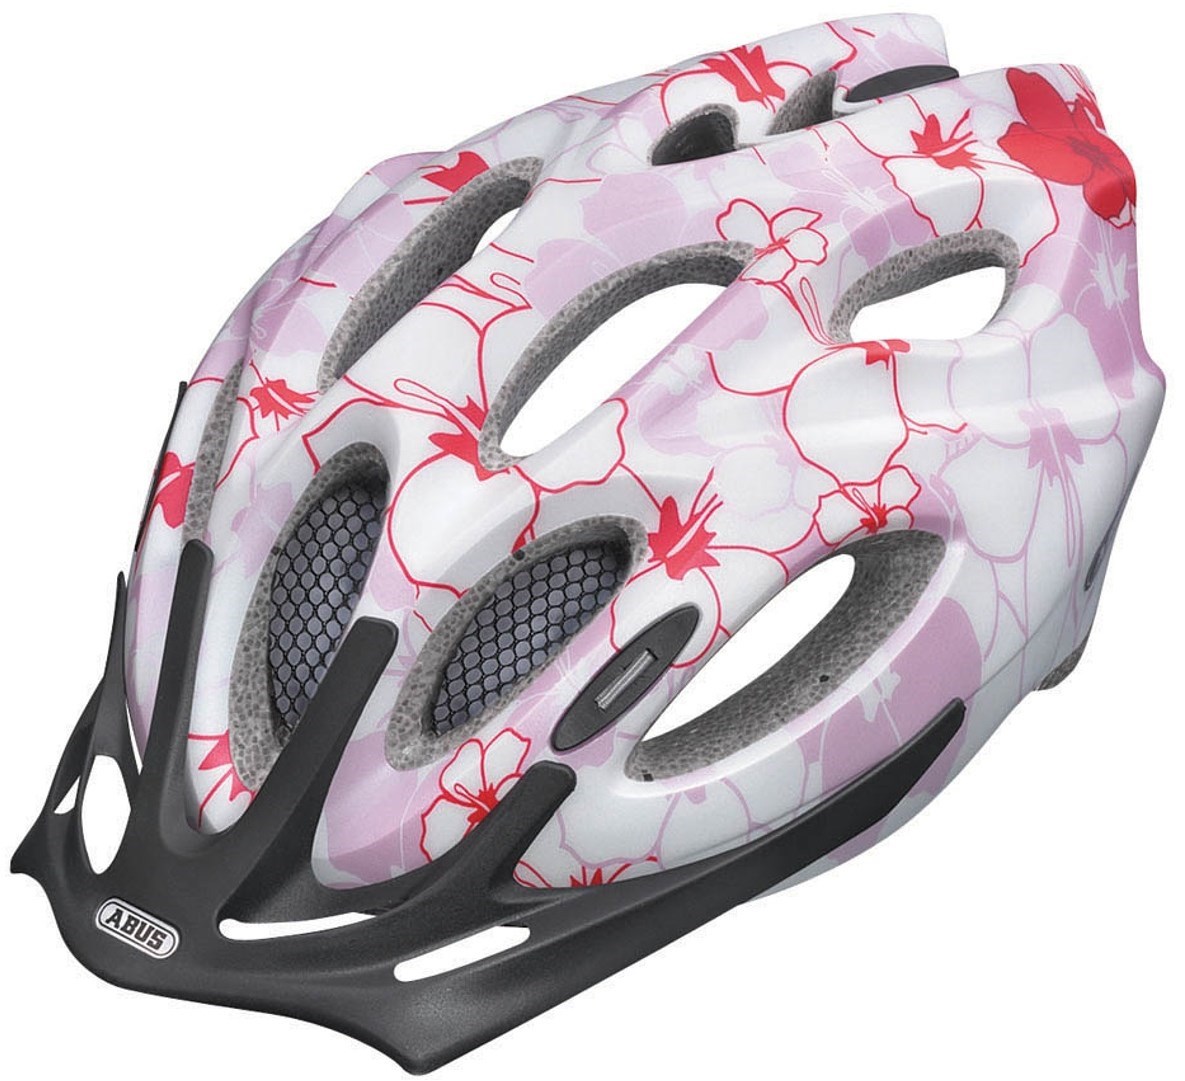 Abus Chaox Plus Kids Cycling Helmet With Integrated Rear LED 2015 product image